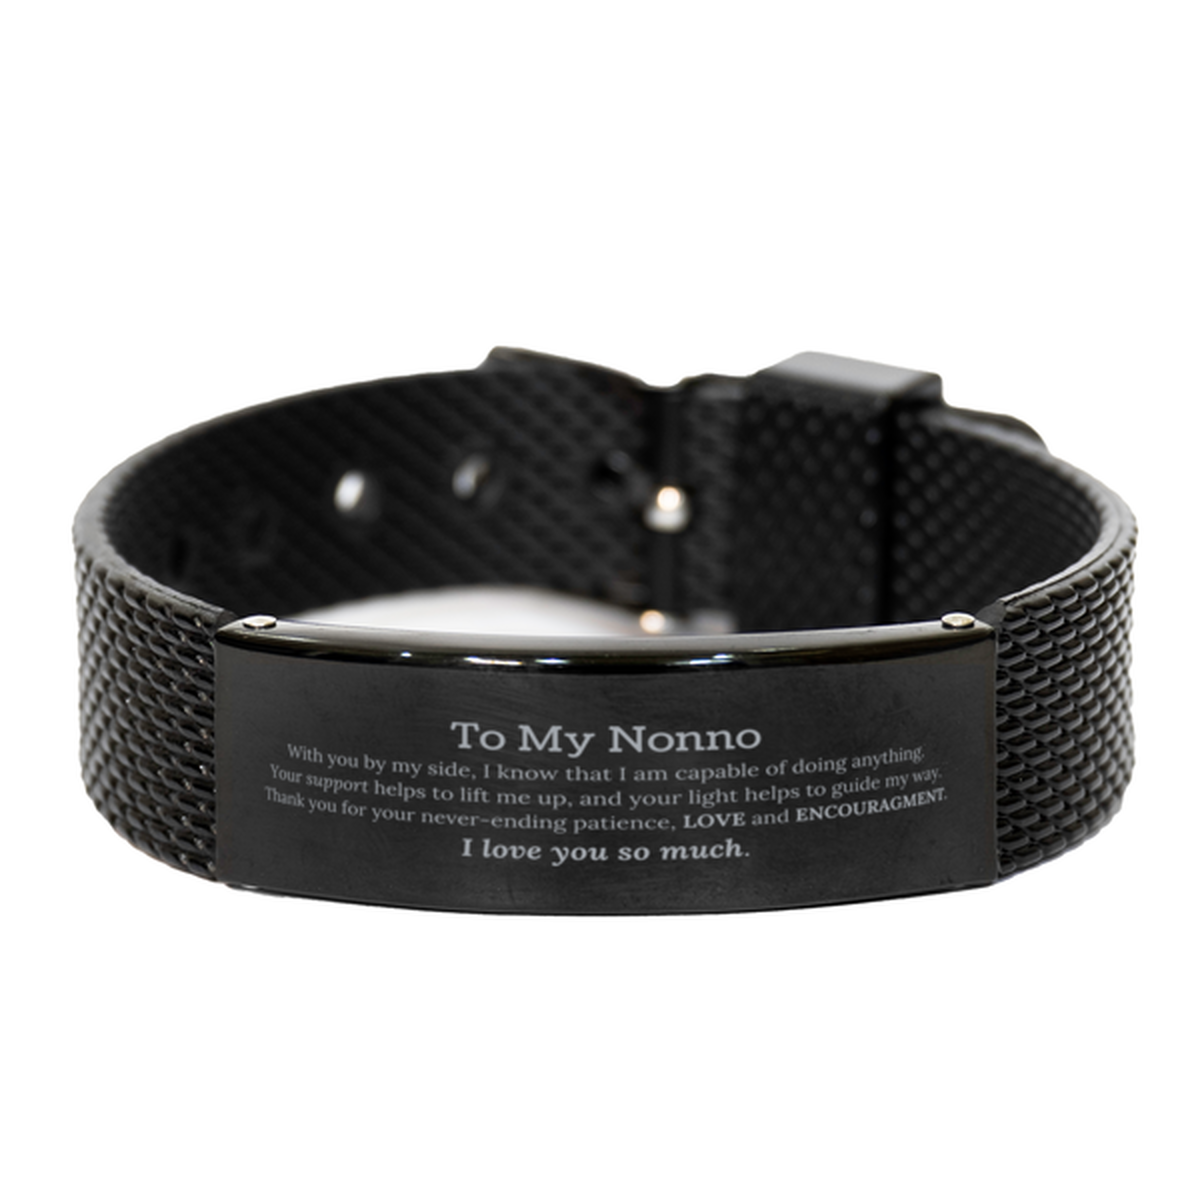 Appreciation Nonno Black Shark Mesh Bracelet Gifts, To My Nonno Birthday Christmas Wedding Keepsake Gifts for Nonno With you by my side, I know that I am capable of doing anything. I love you so much